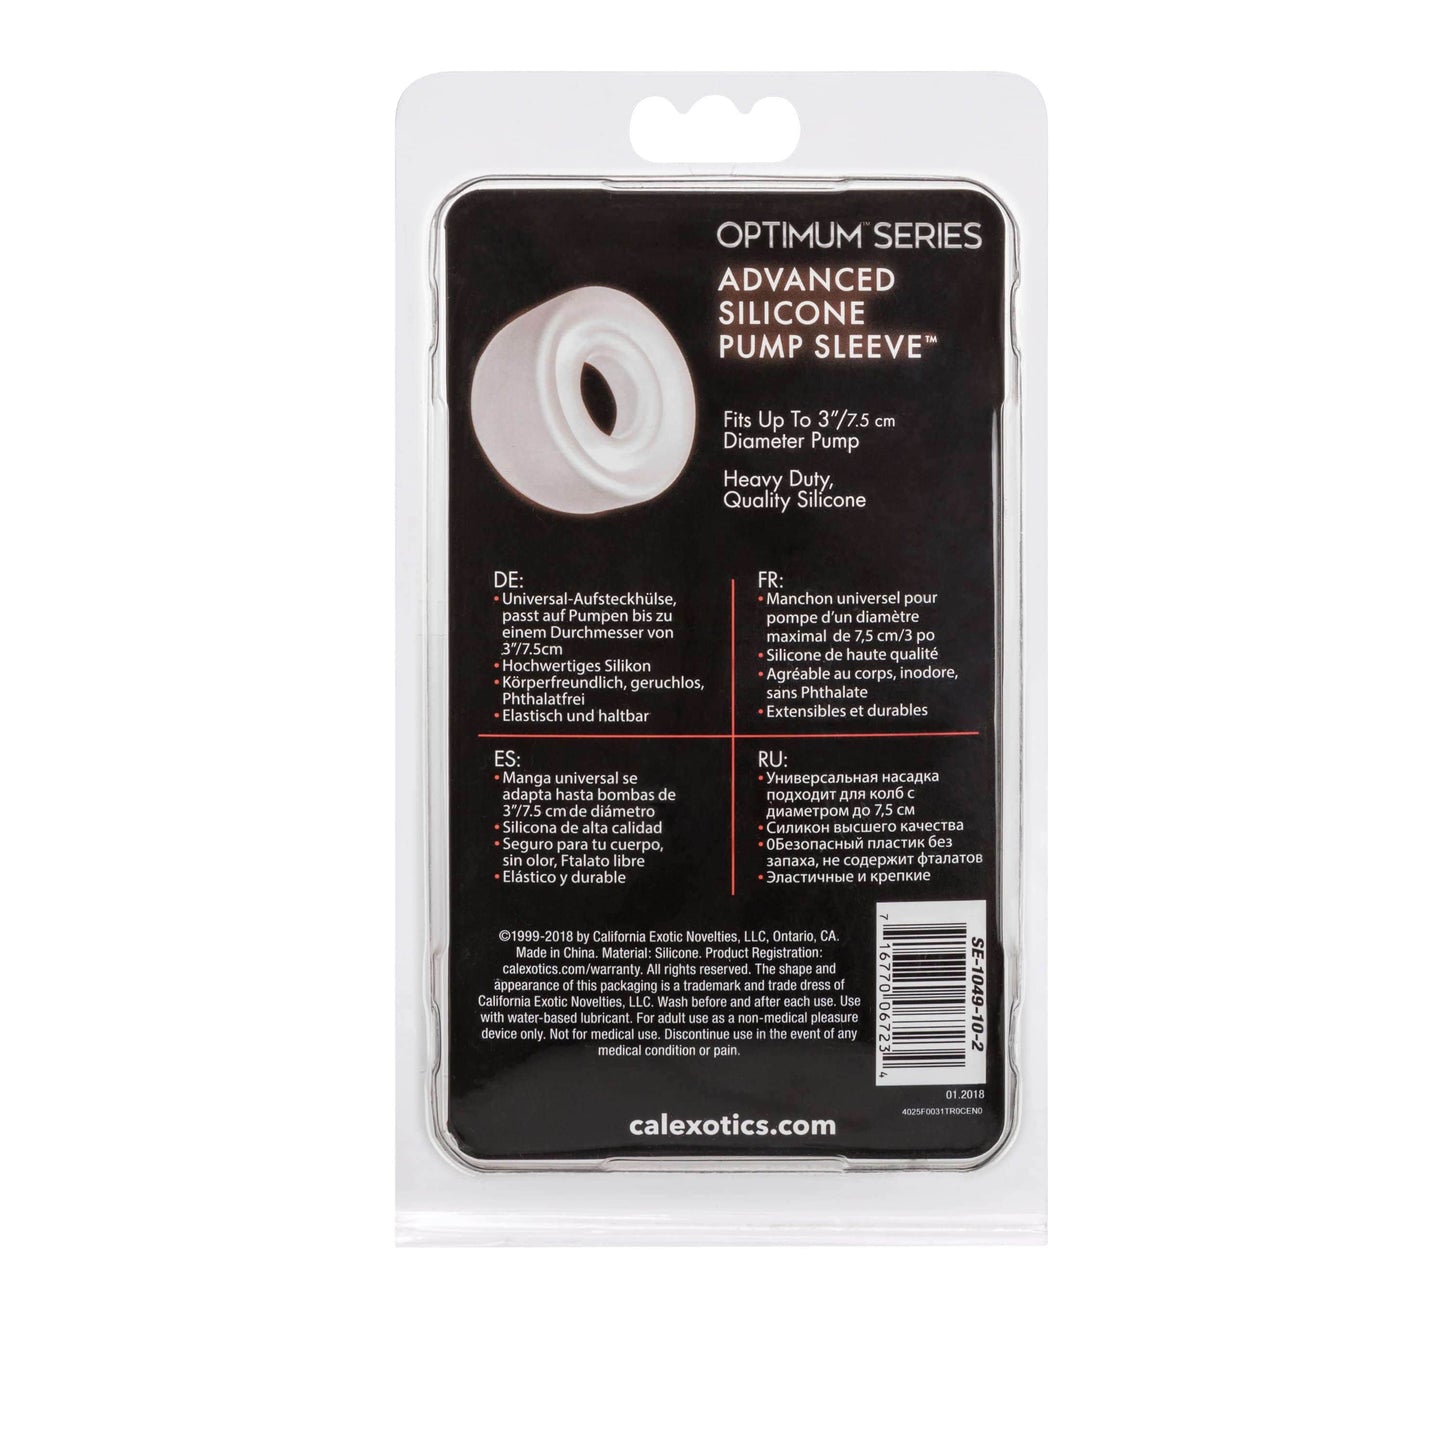 Optimum Series Advanced Silicone Pump Sleeve - Thorn & Feather Sex Toy Canada